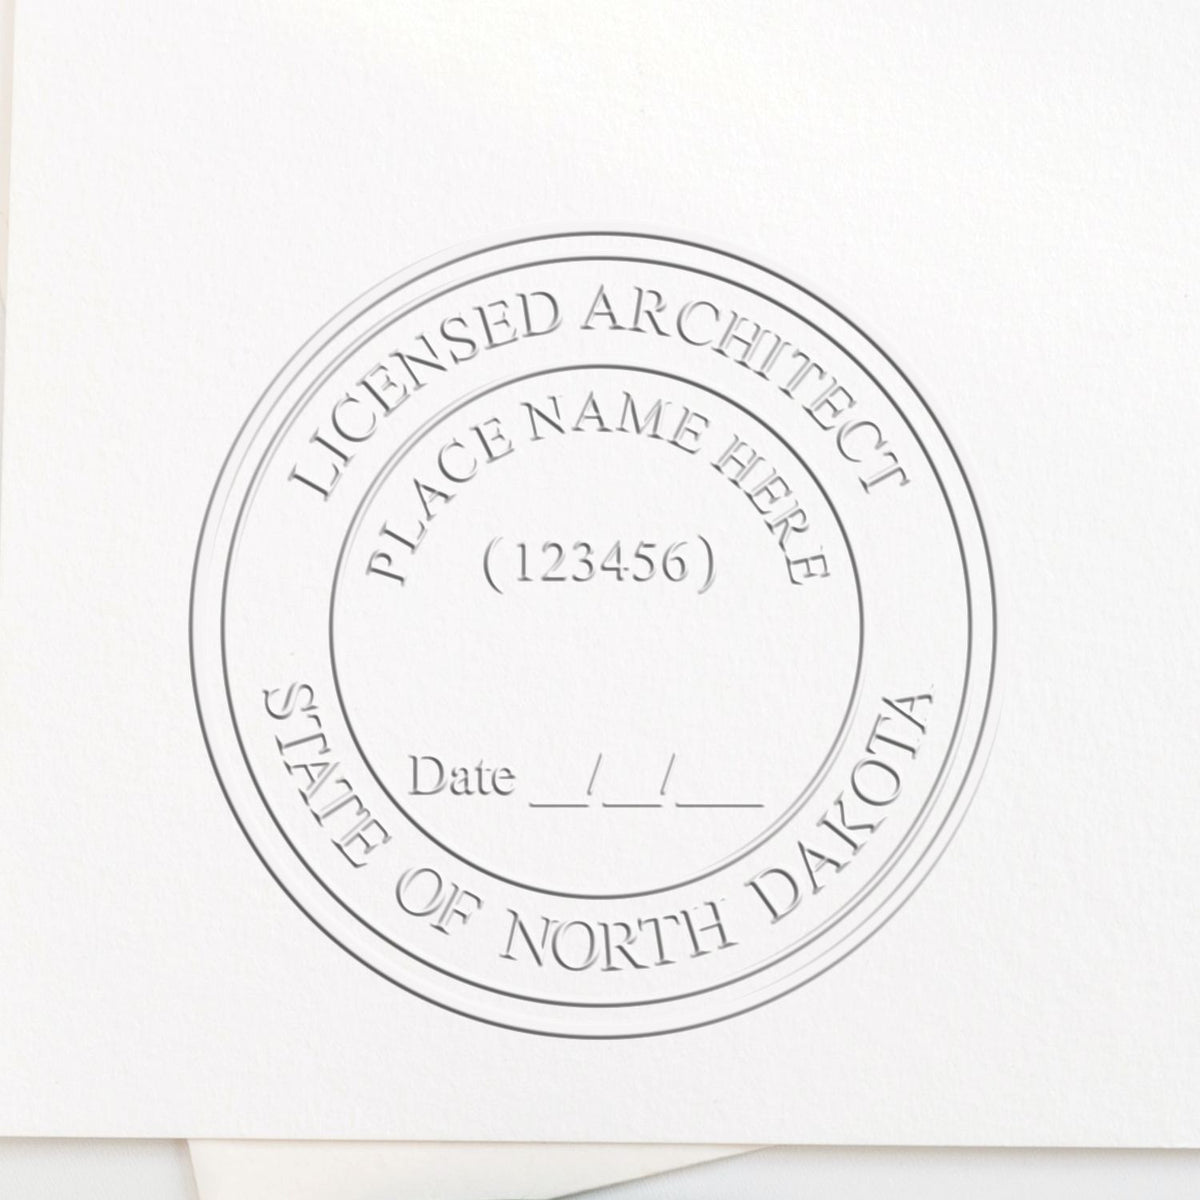 A photograph of the Hybrid North Dakota Architect Seal stamp impression reveals a vivid, professional image of the on paper.